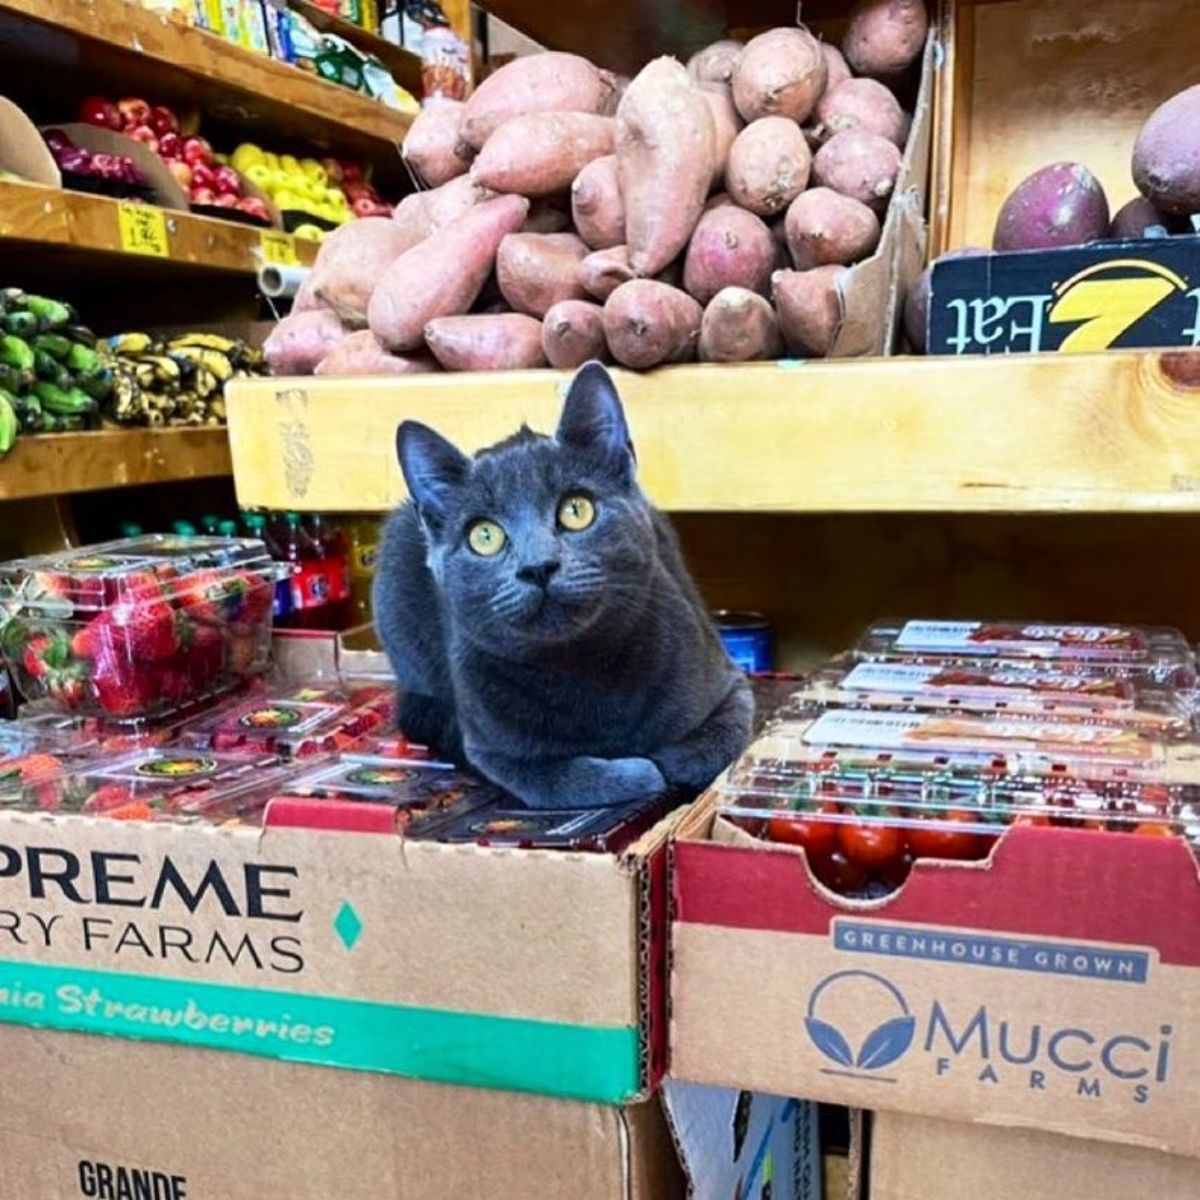 black cat sitting on some boxes of fruits